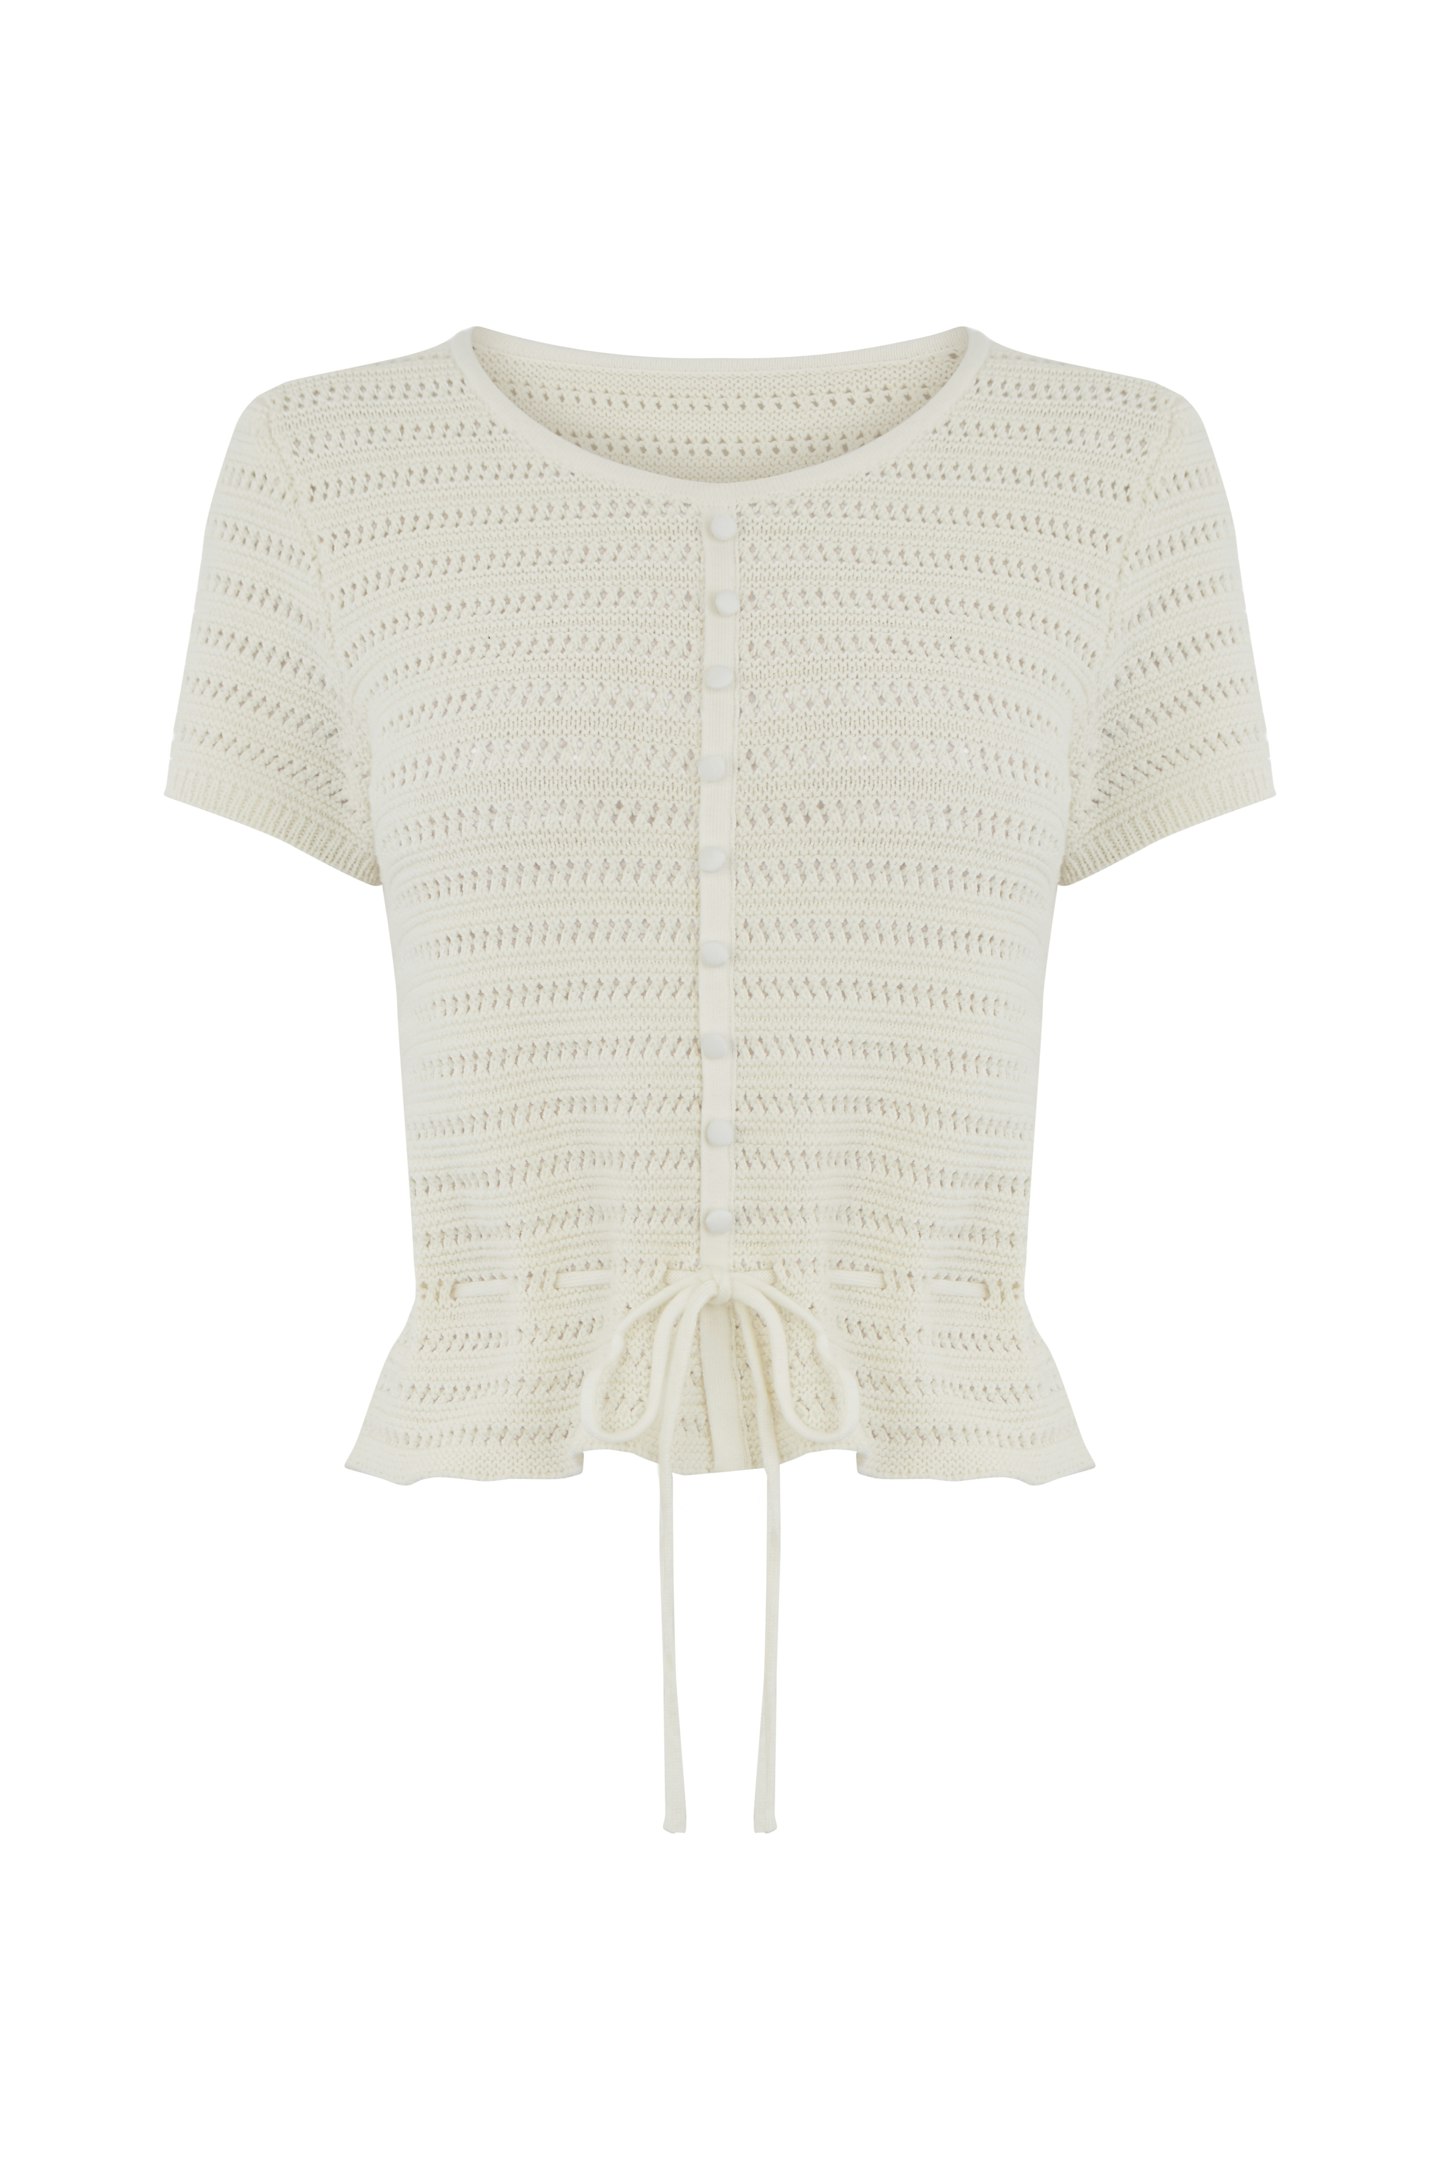 Knitted Top, £56